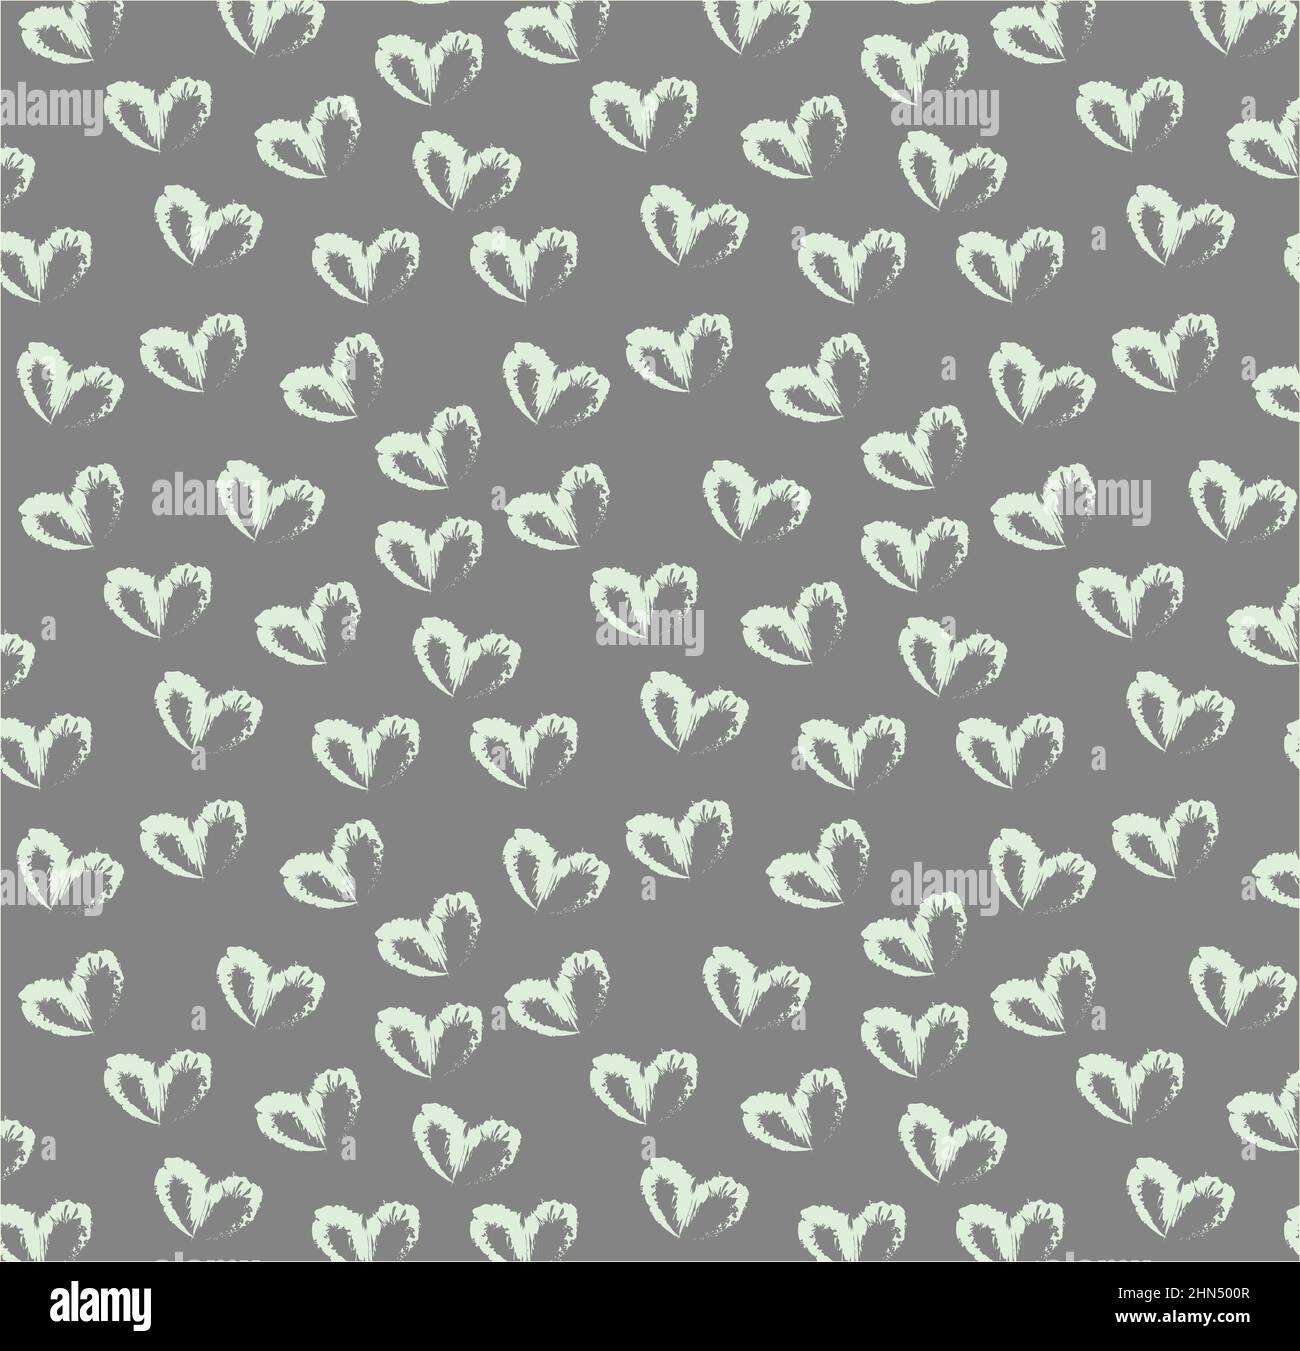 Seamless pattern of hand drawn simple hearts in pastel green color on gray background Stock Photo